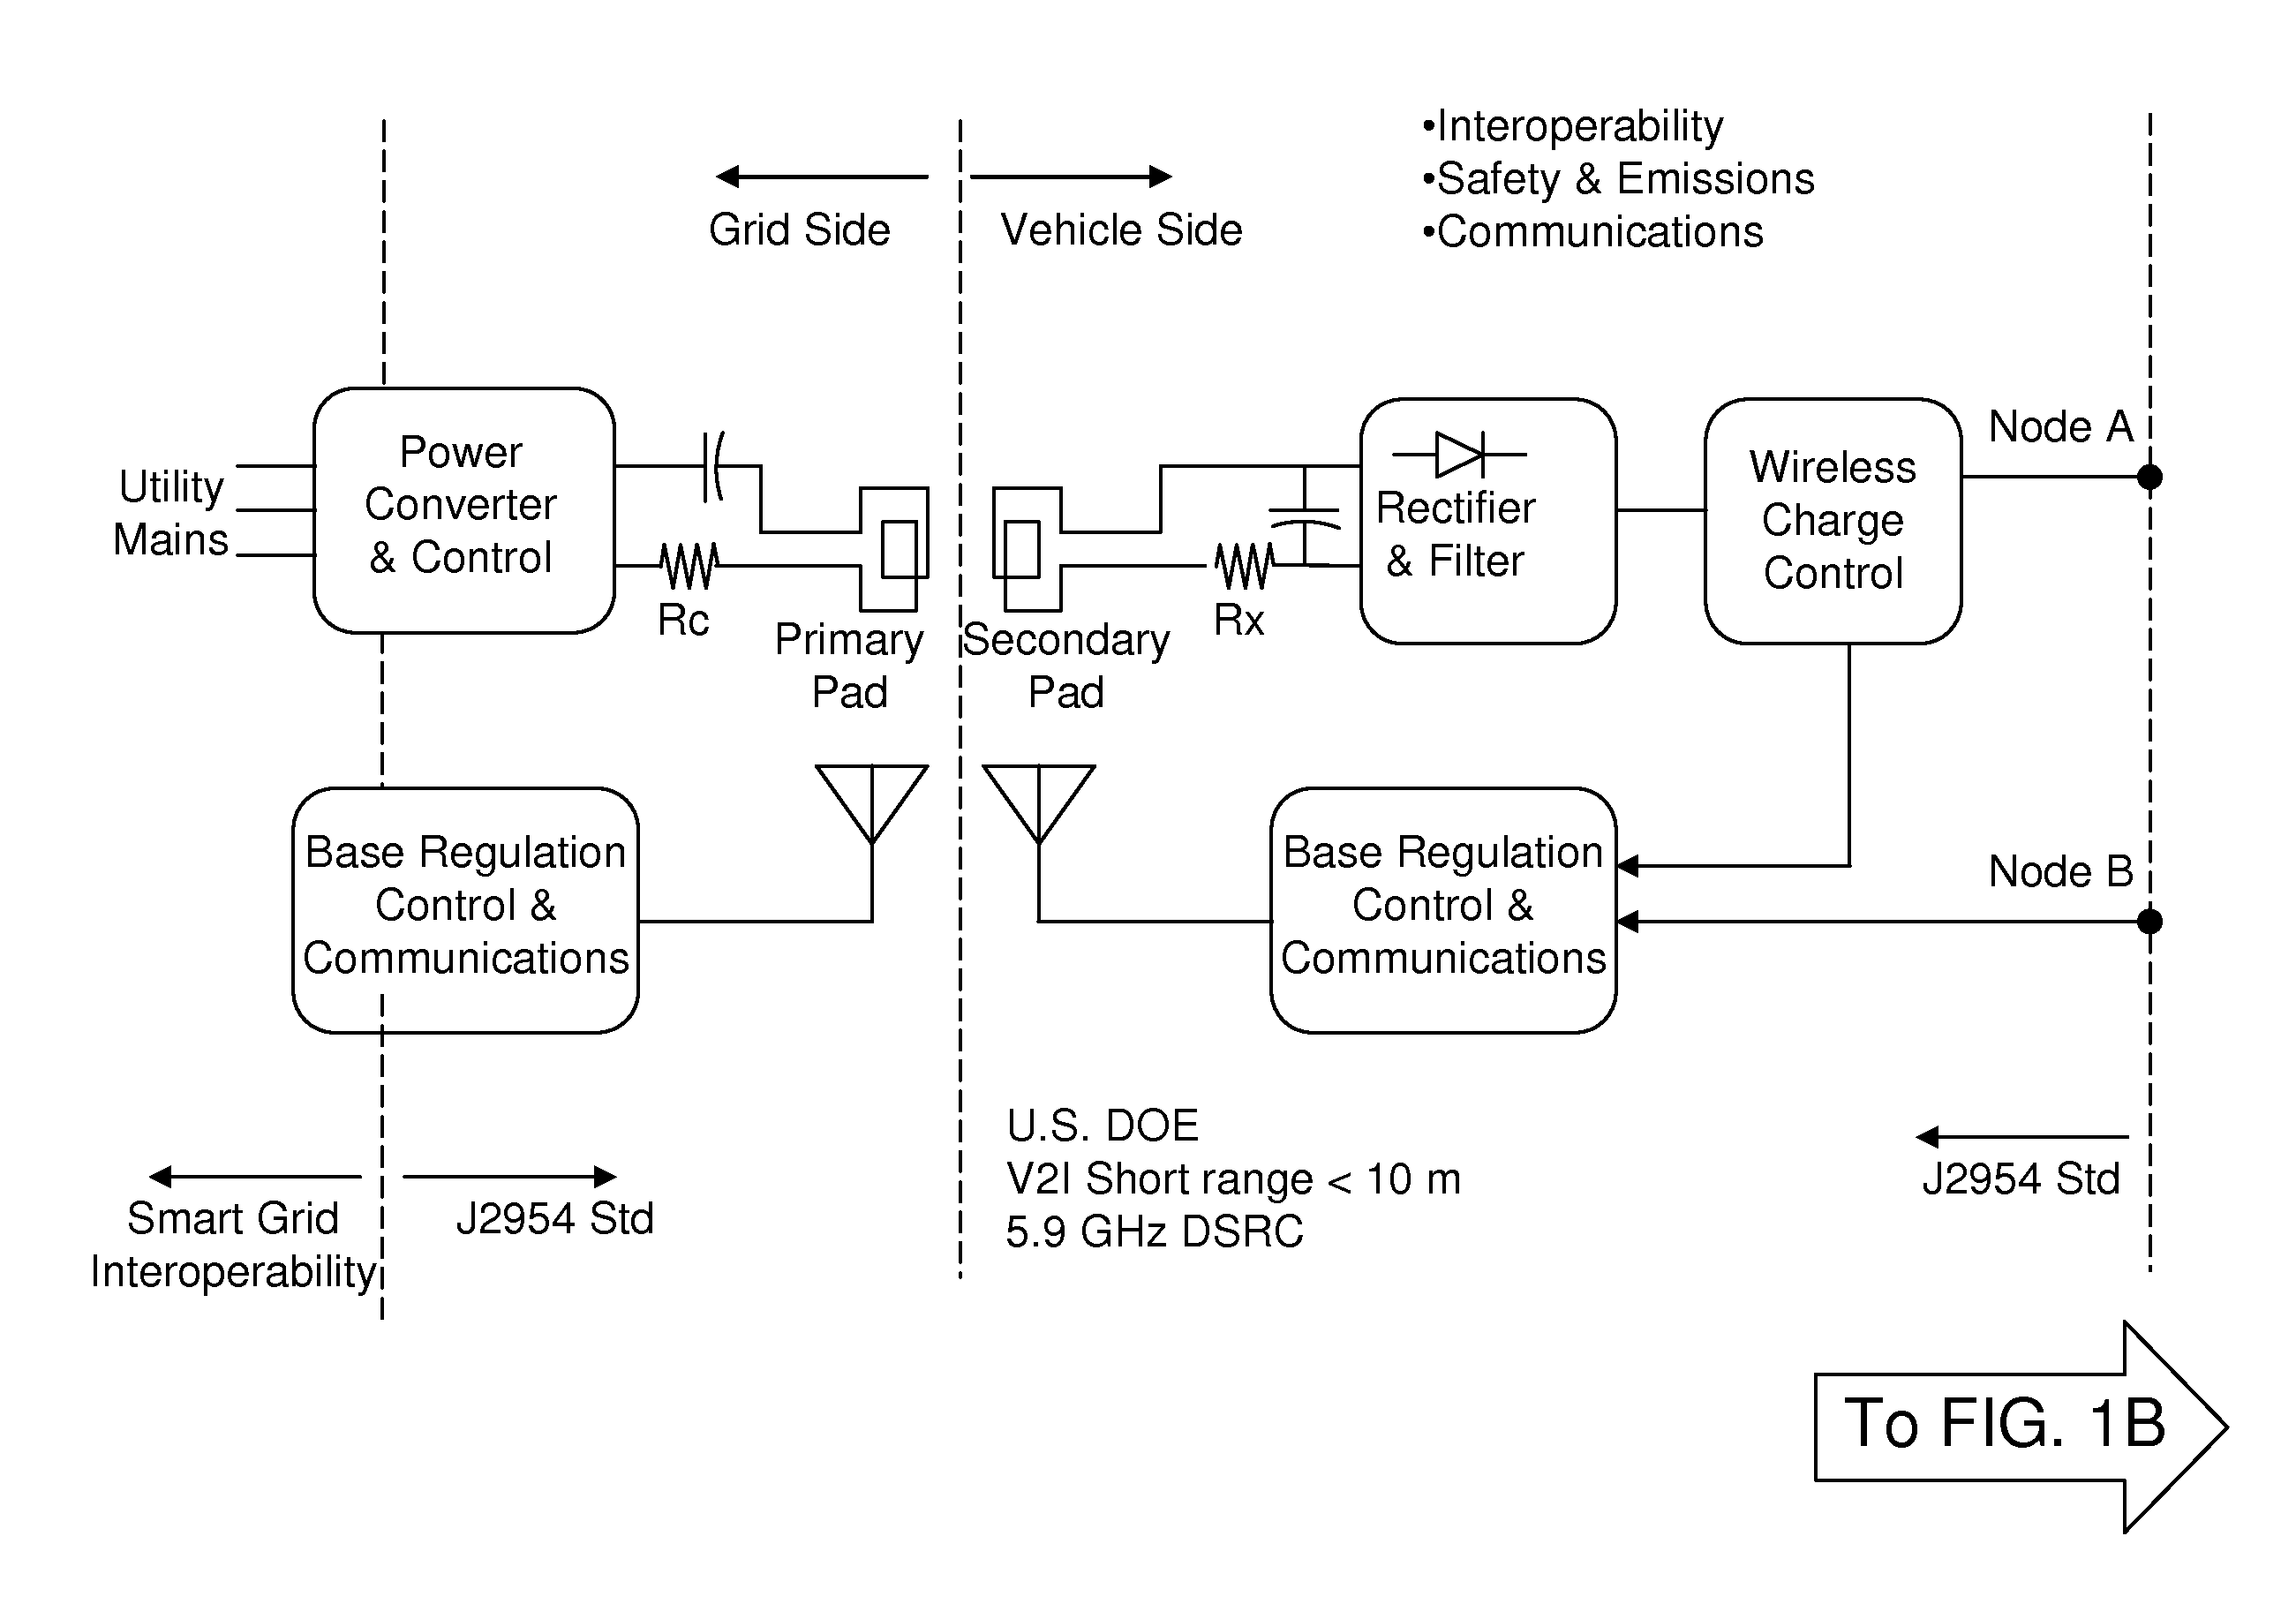 Regulation control and energy management scheme for wireless power transfer